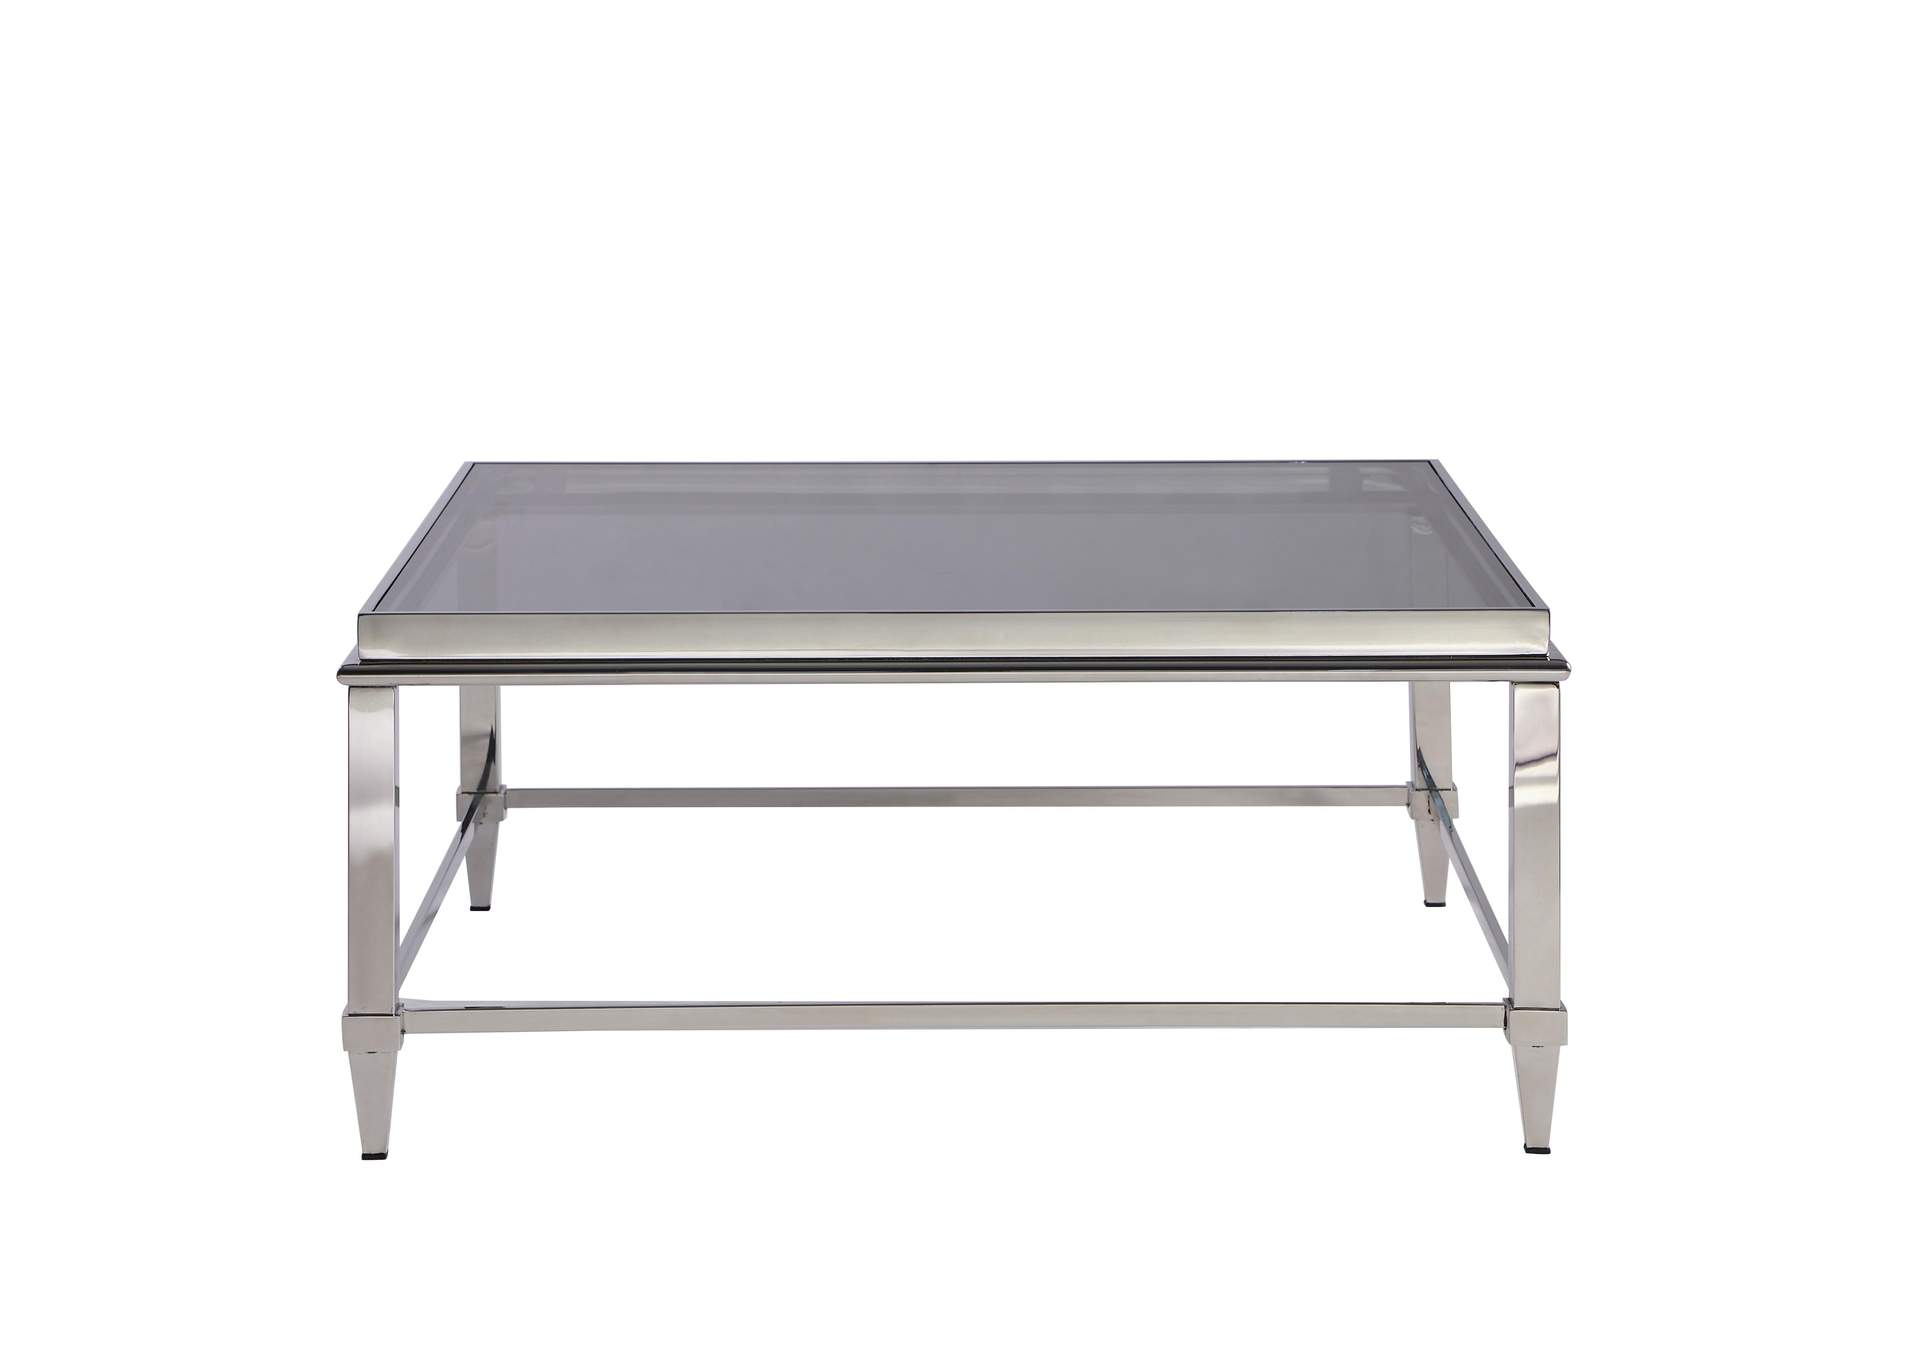 Contemporary Square Cocktail Table With Glass Top & Gray Trim,Chintaly Imports